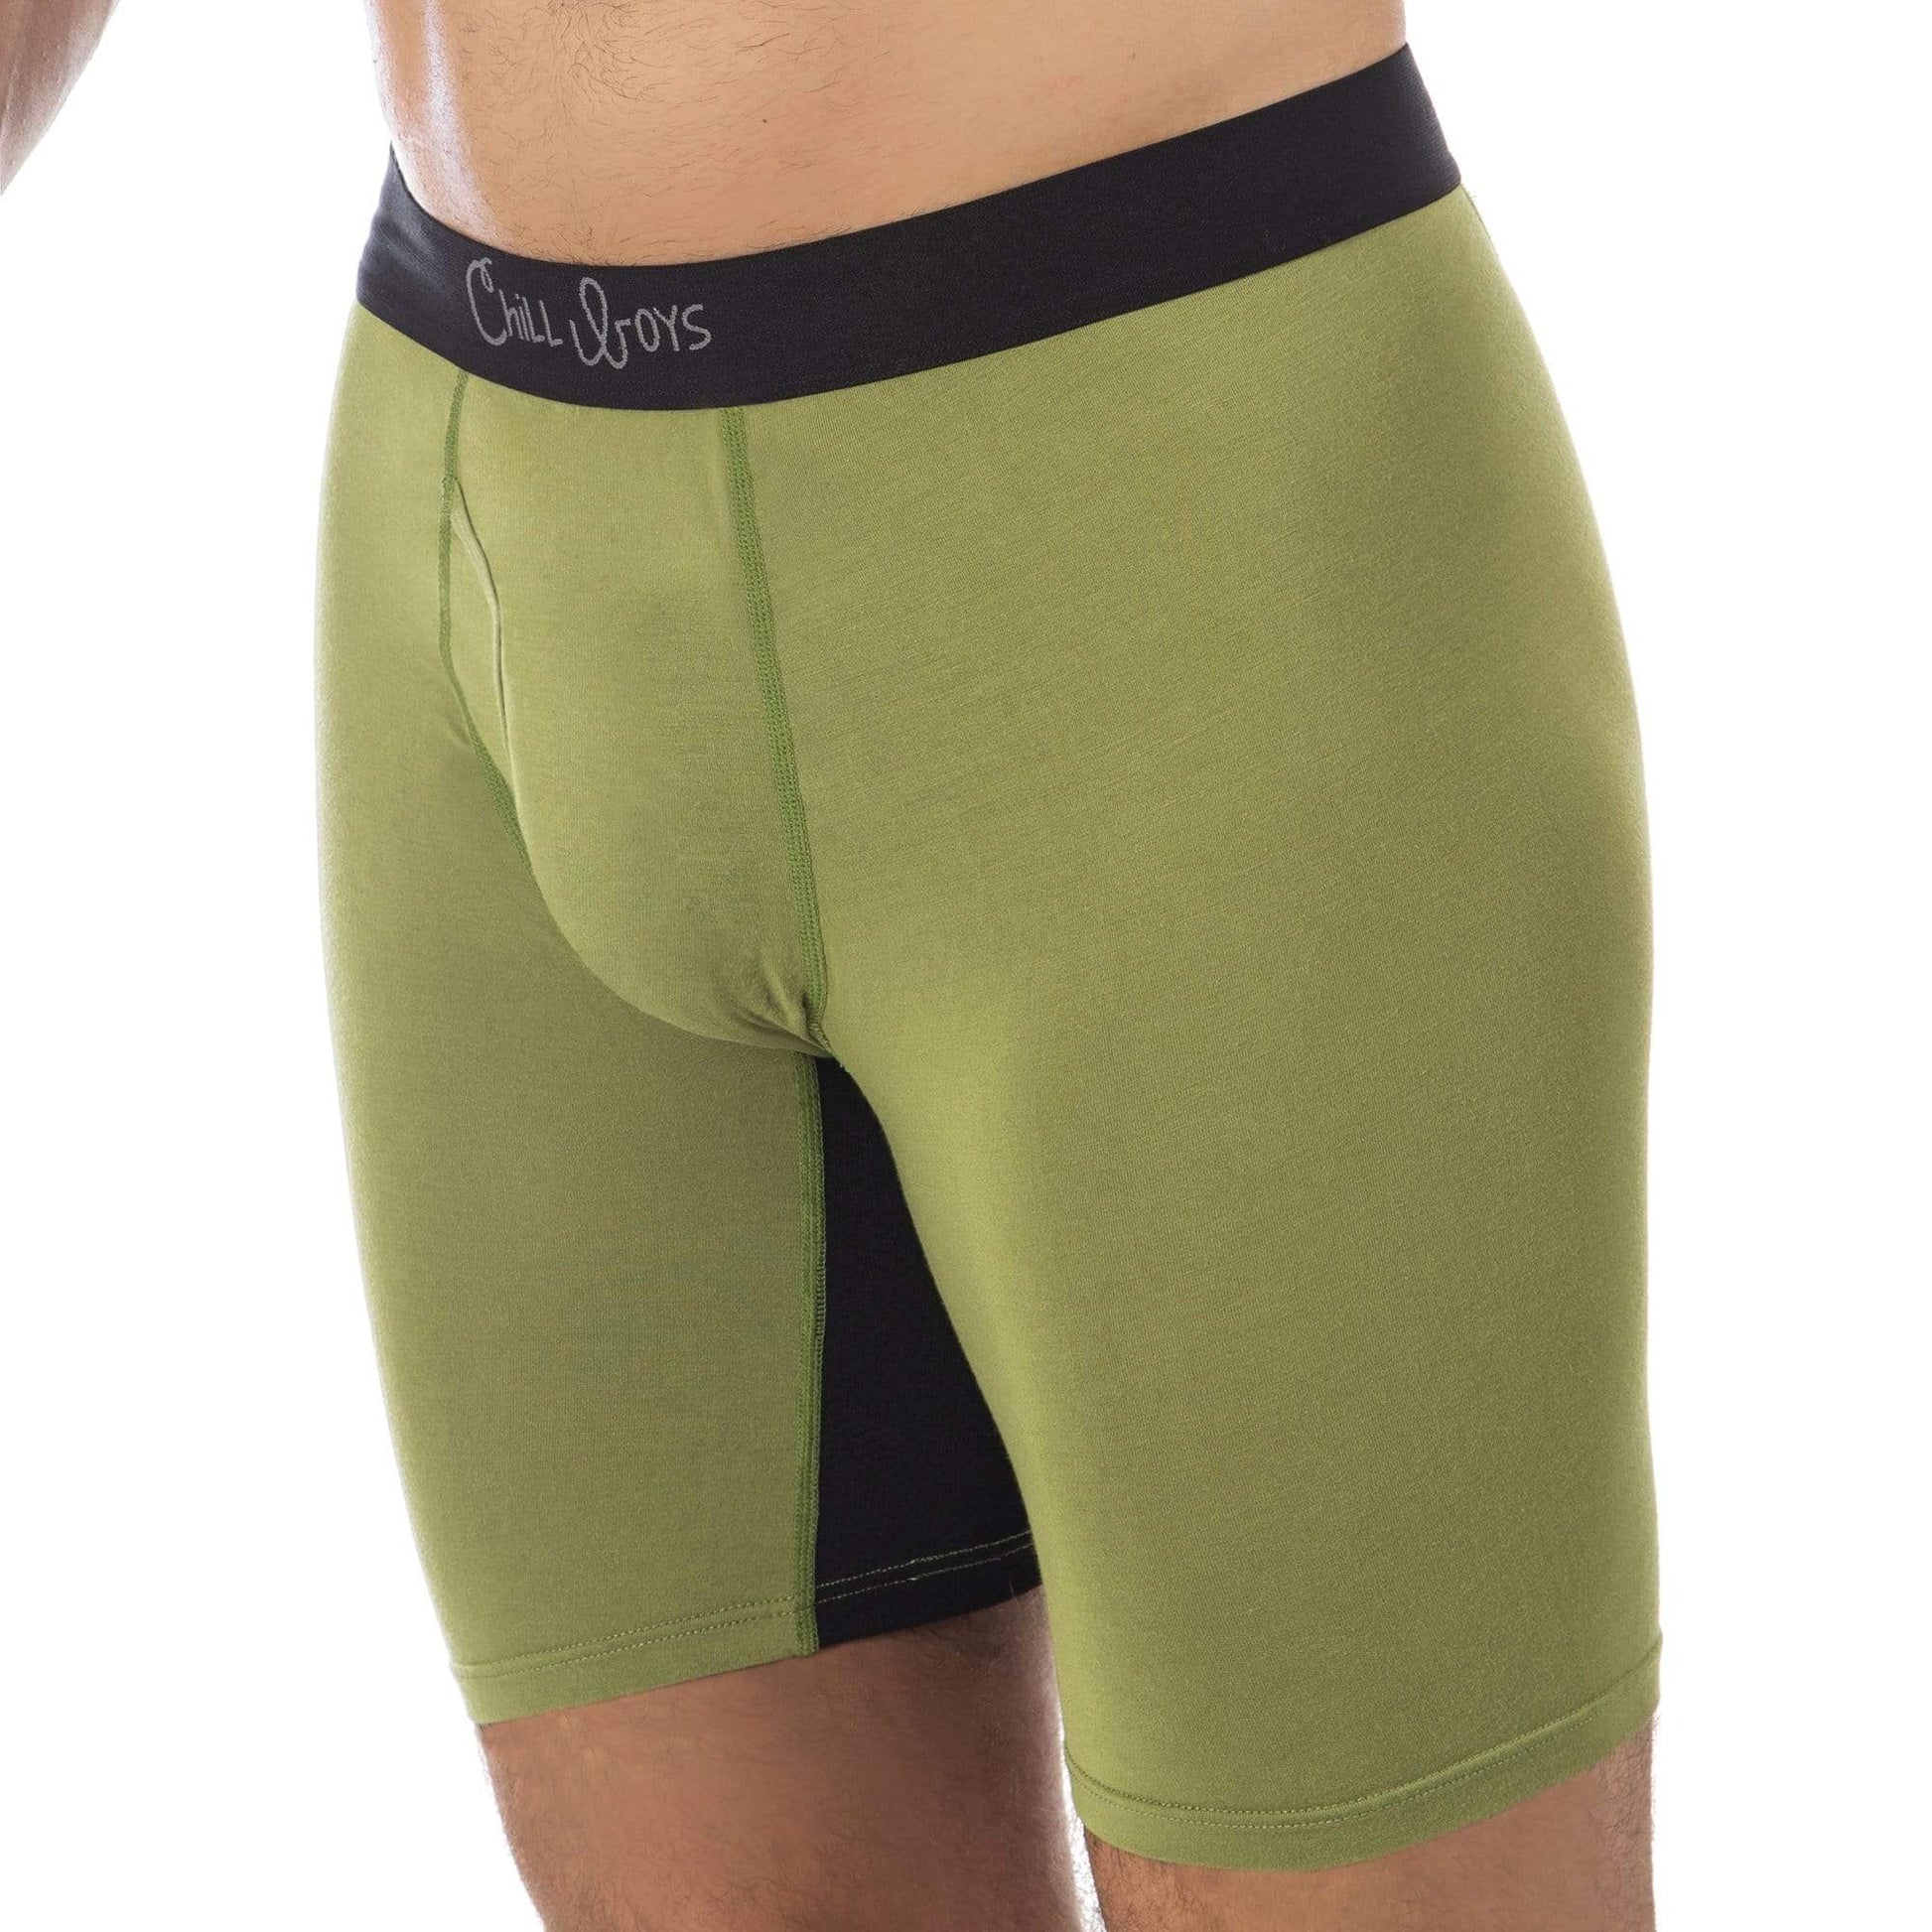 Men's Boxer Briefs With A Pouch | Anti-Chafing Boxers, 5x Softer Than Cotton